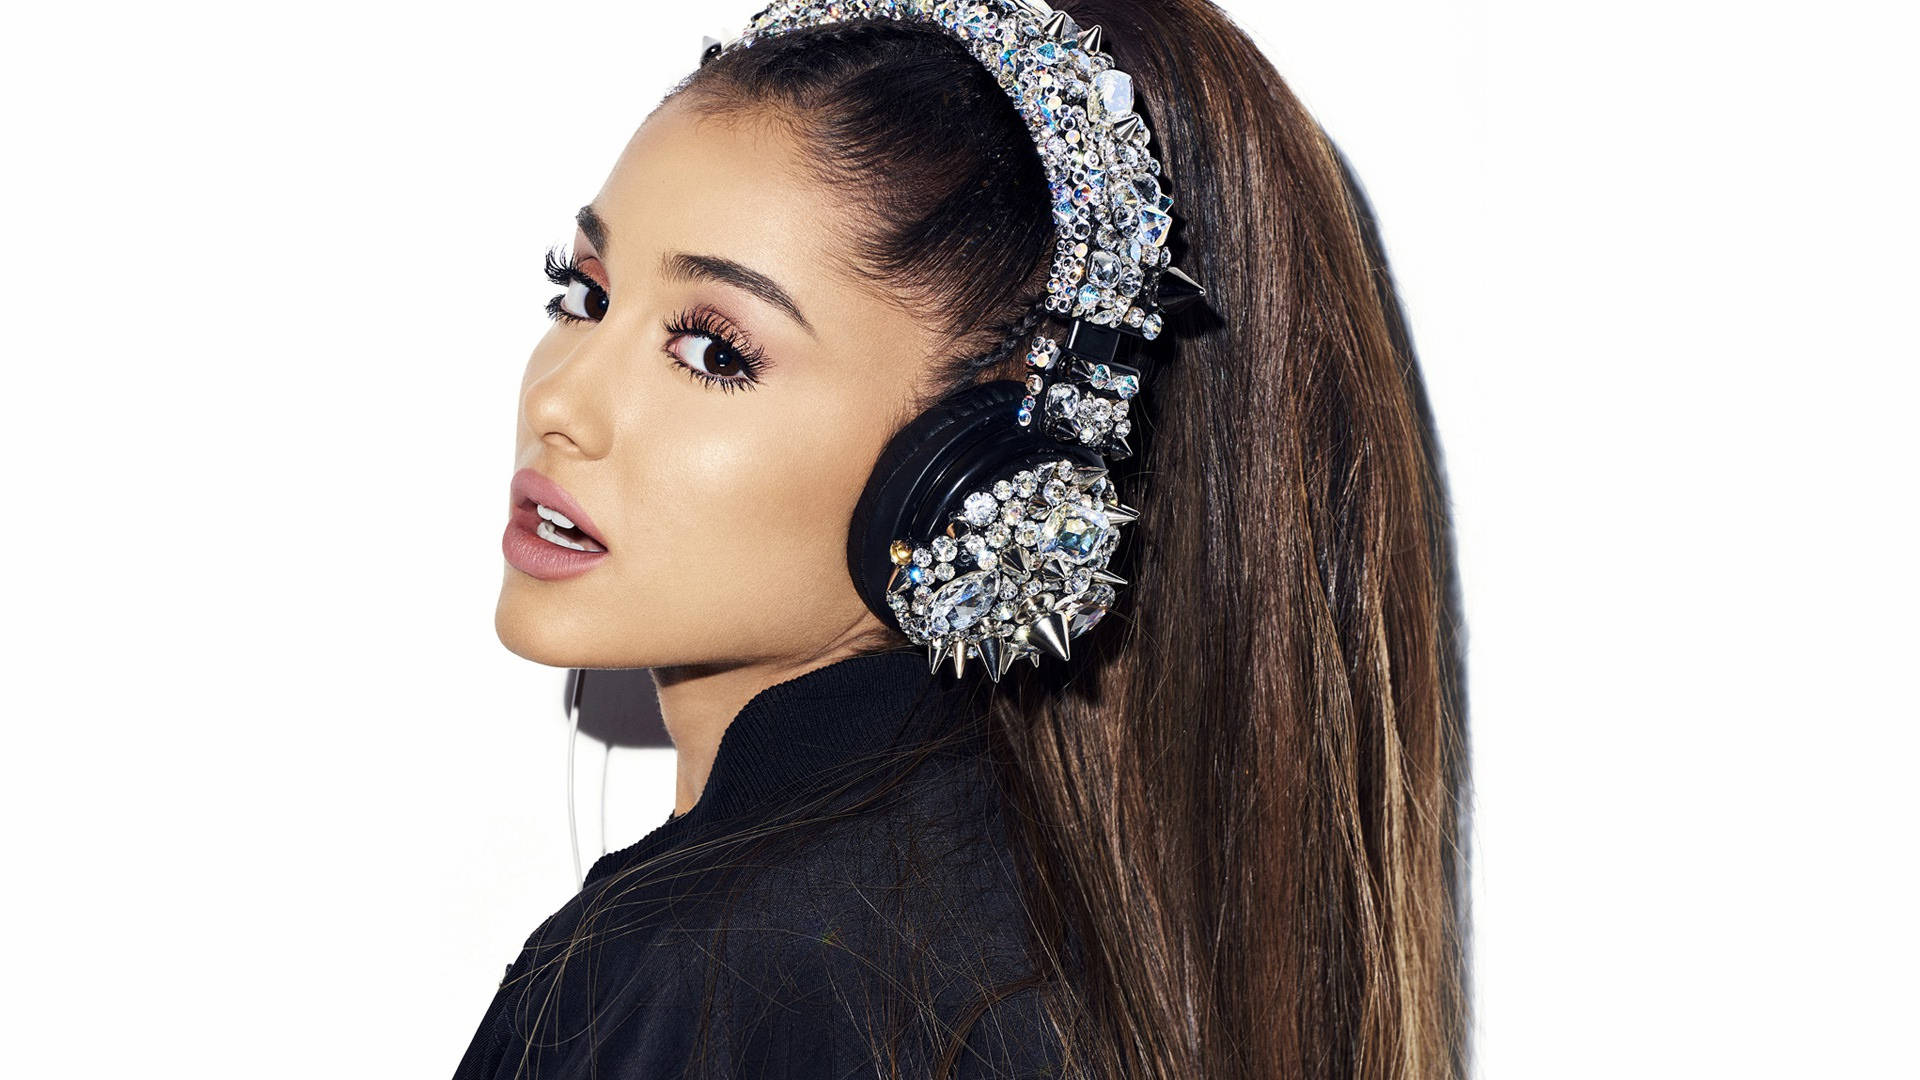 Ariana Grande looking perfect while rocking her silver diamond studs and headphones Wallpaper